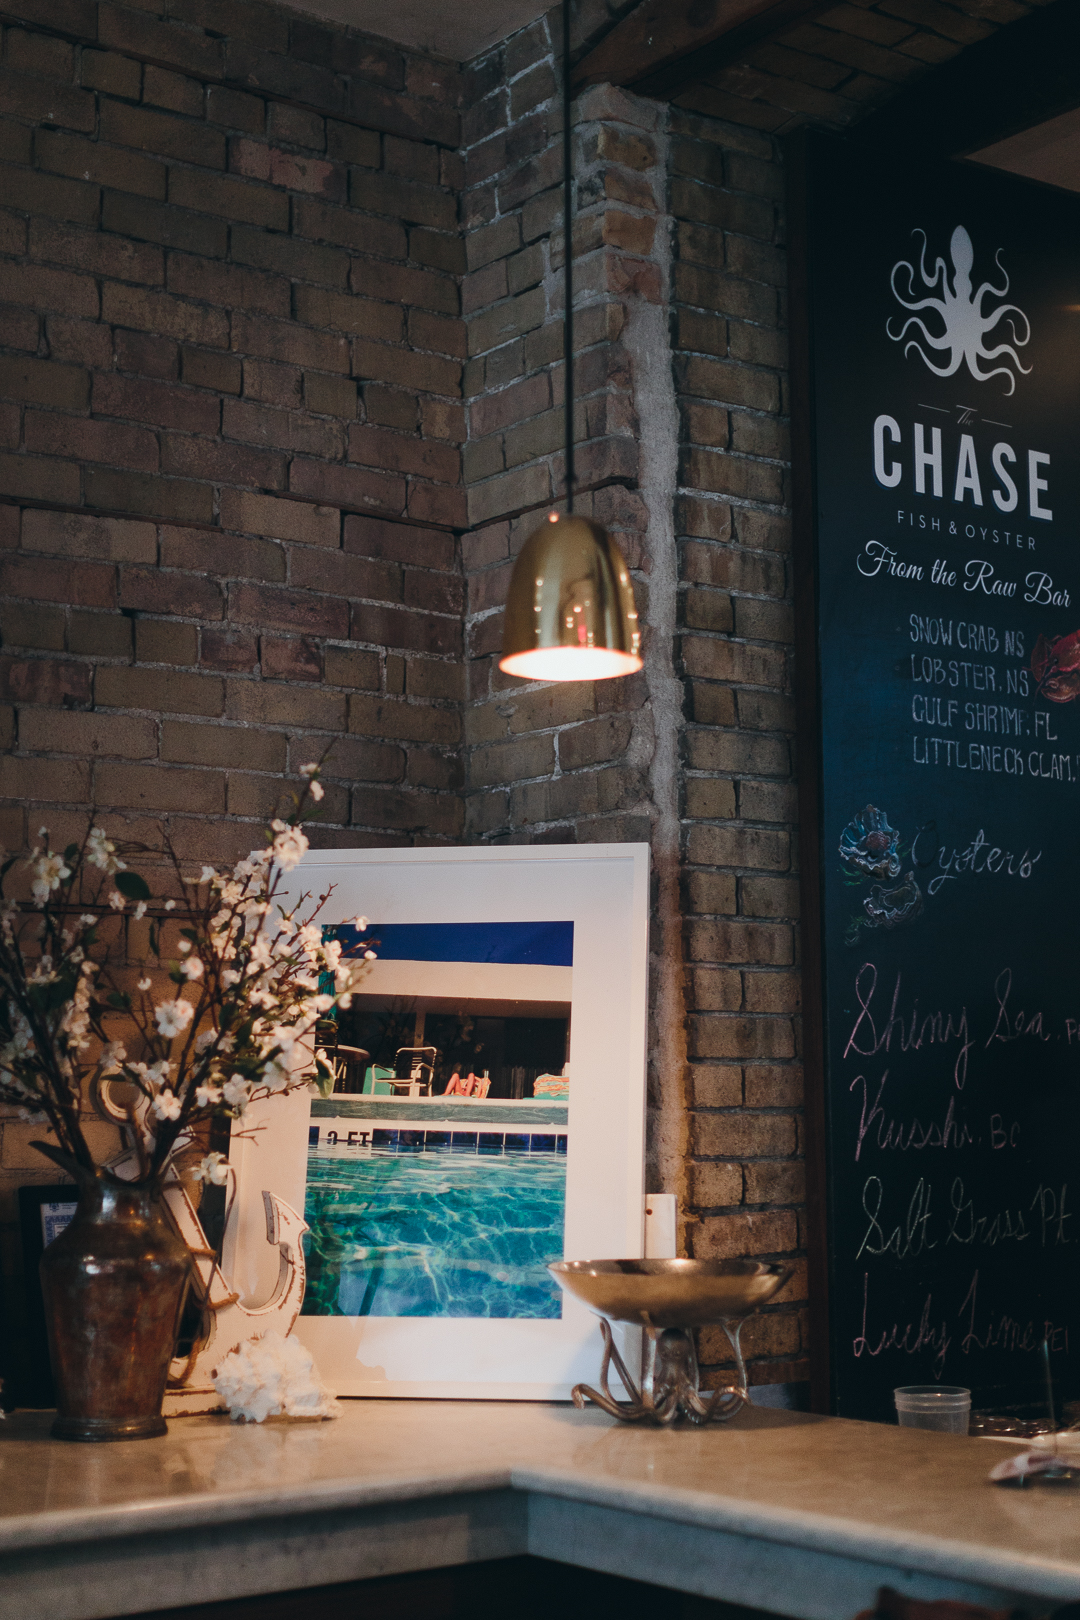 The chase fish and oyster restaurant wedding